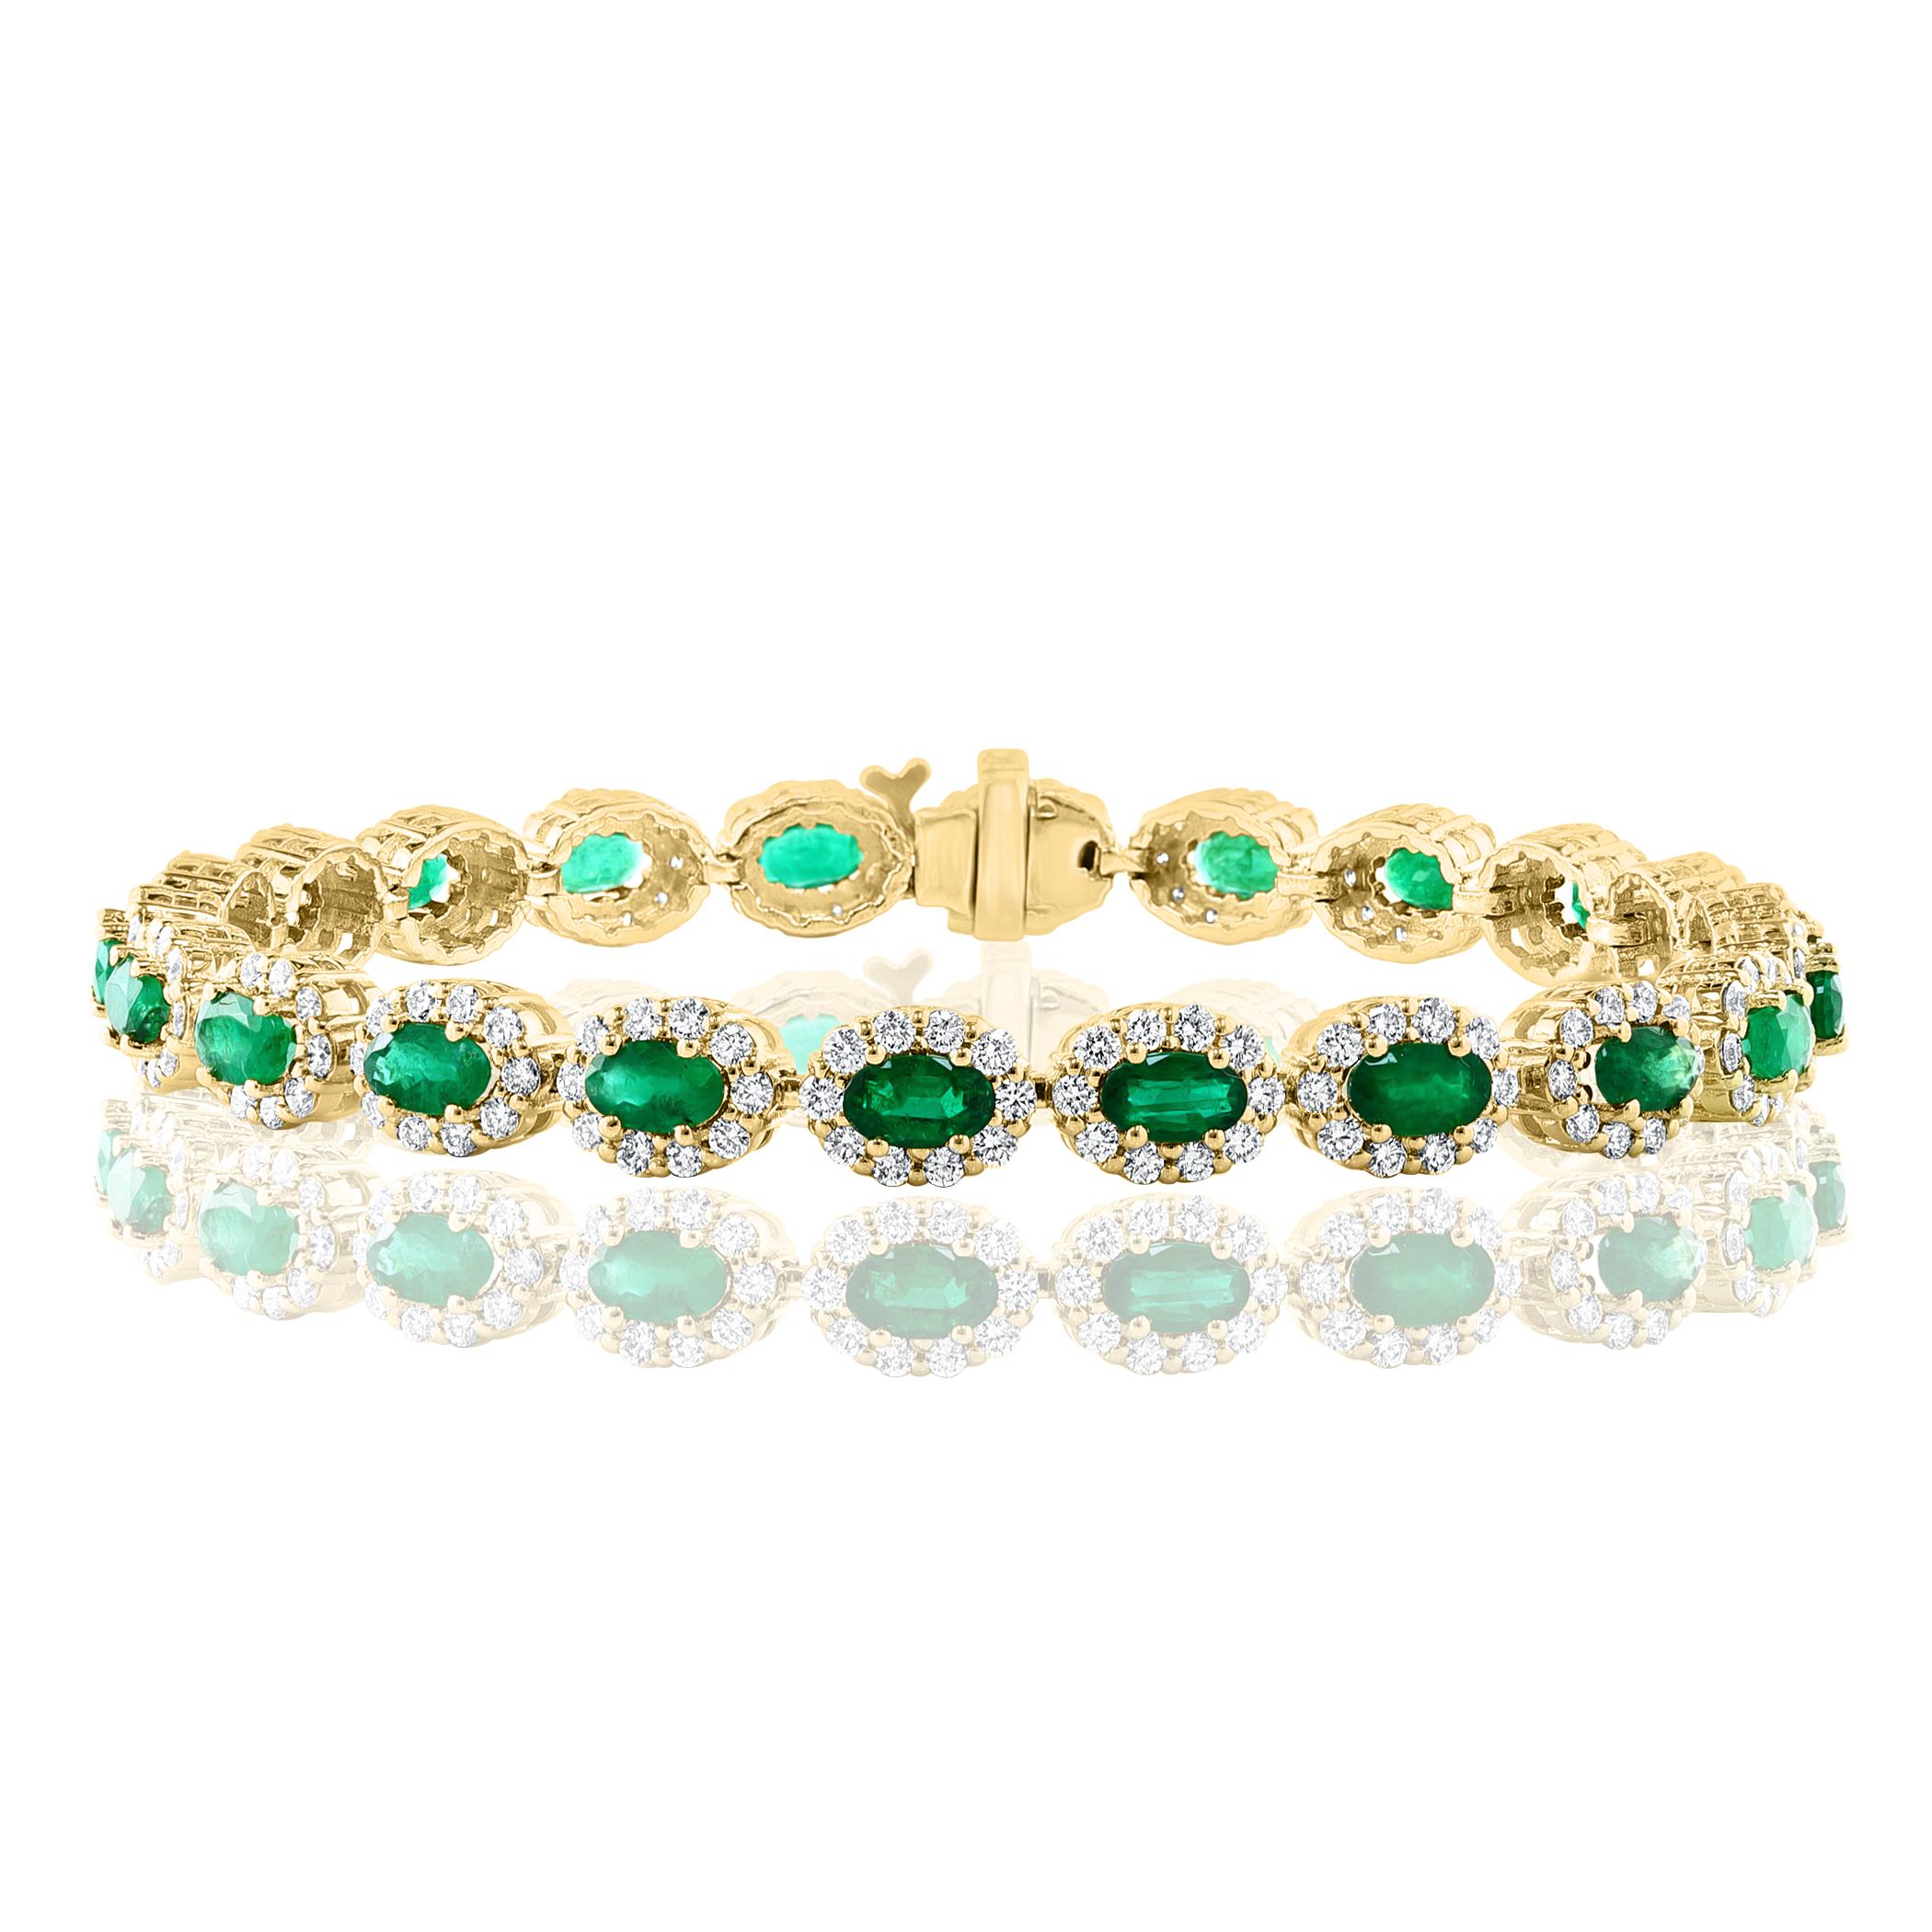 Modern 4.69 Carat Oval Cut Emerald and Diamond Halo Bracelet in 14K Yellow Gold For Sale